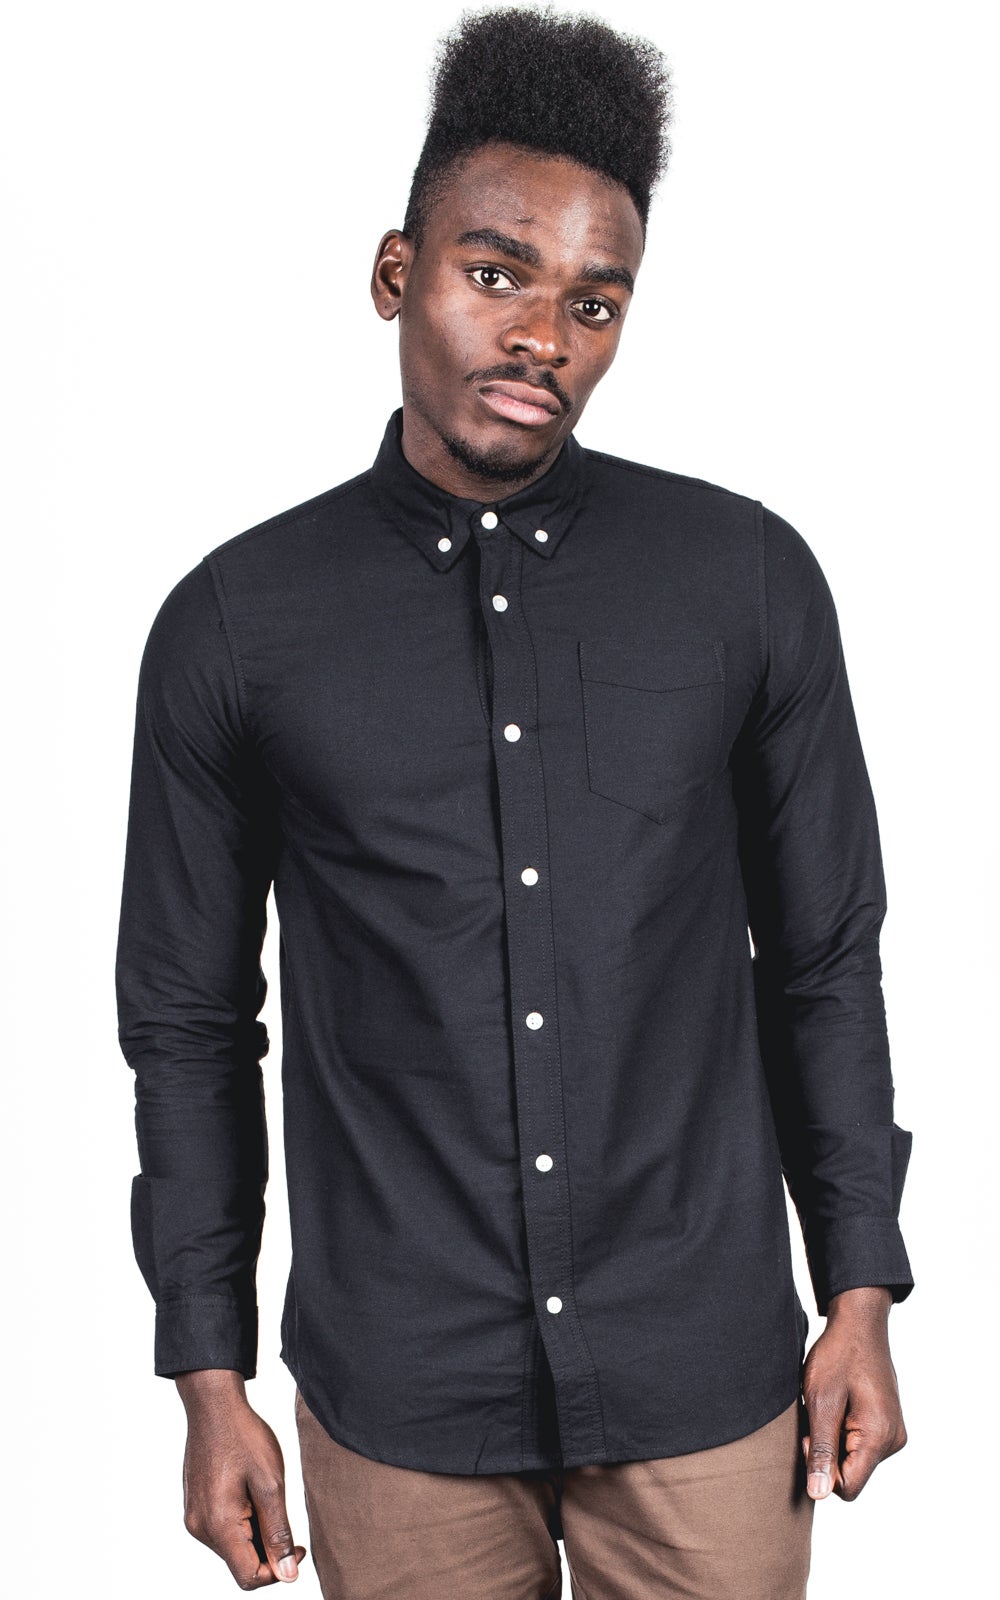 https://www.redrat.co.nz/content/products/as-colour-oxford-shirt-black-front-28073.jpg